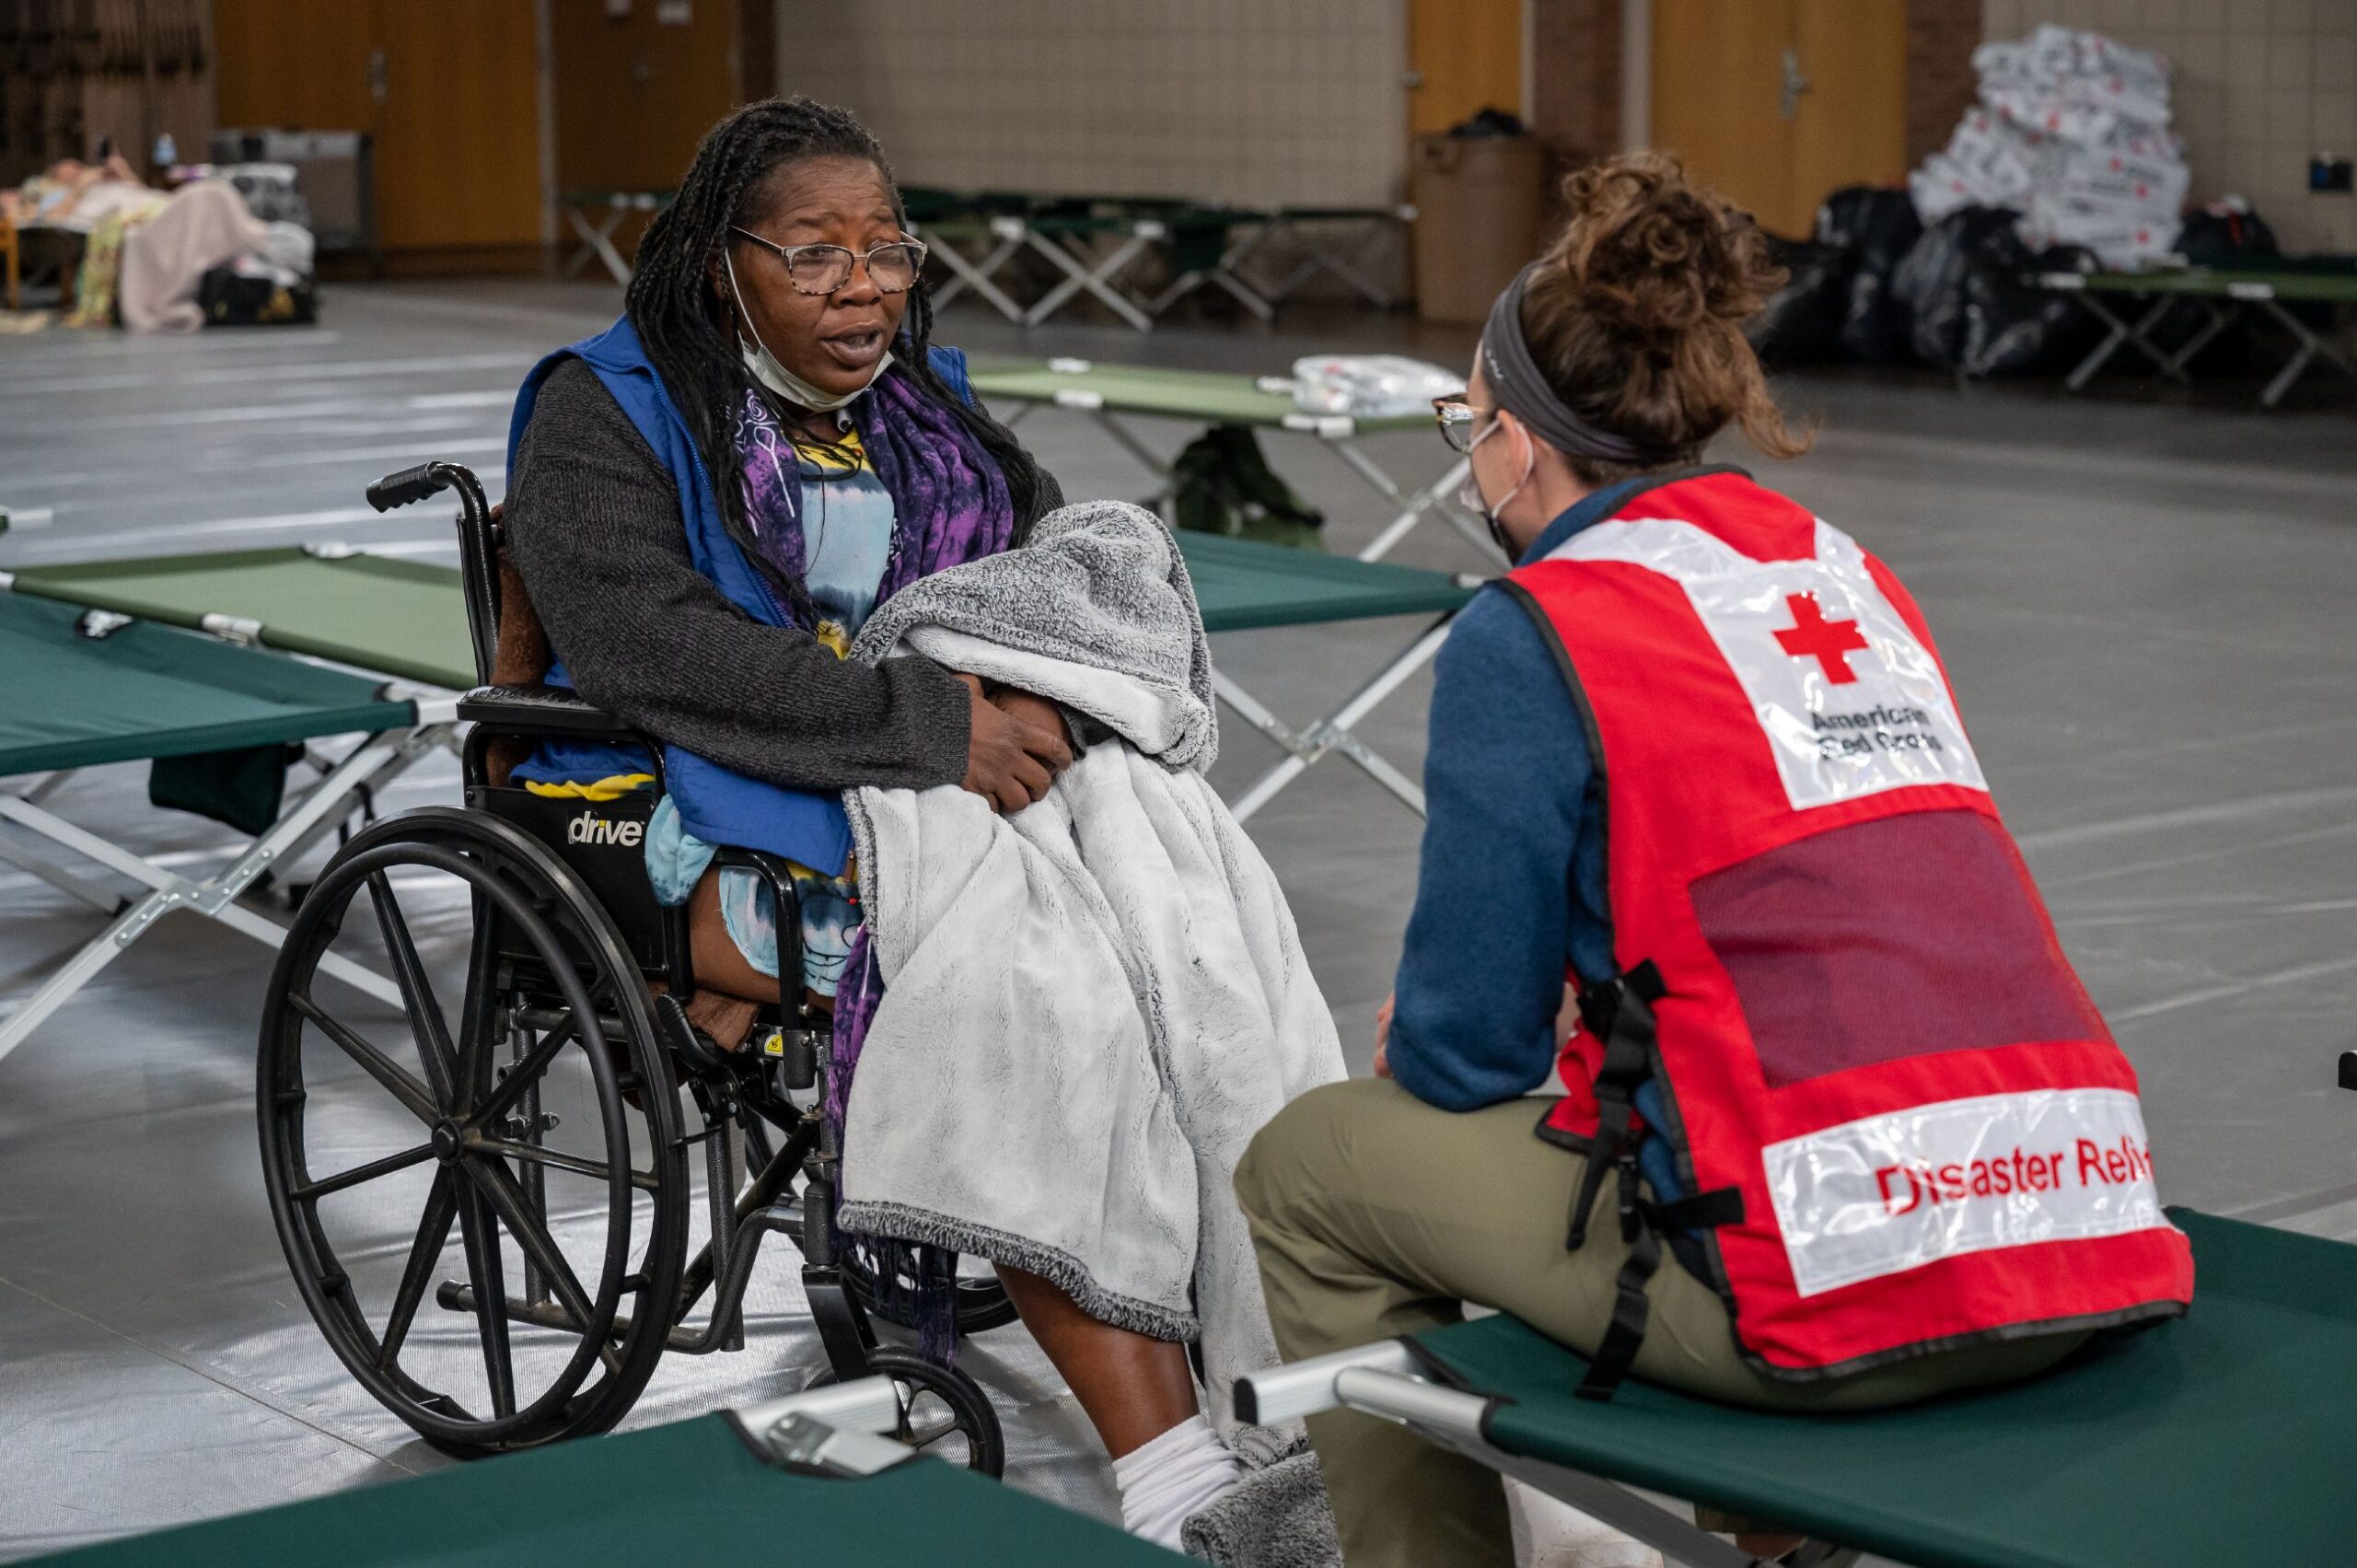 A disaster relief shelter, where a Red Cross worker wearing a vest is providing assistance to an elderly woman in a wheelchair.